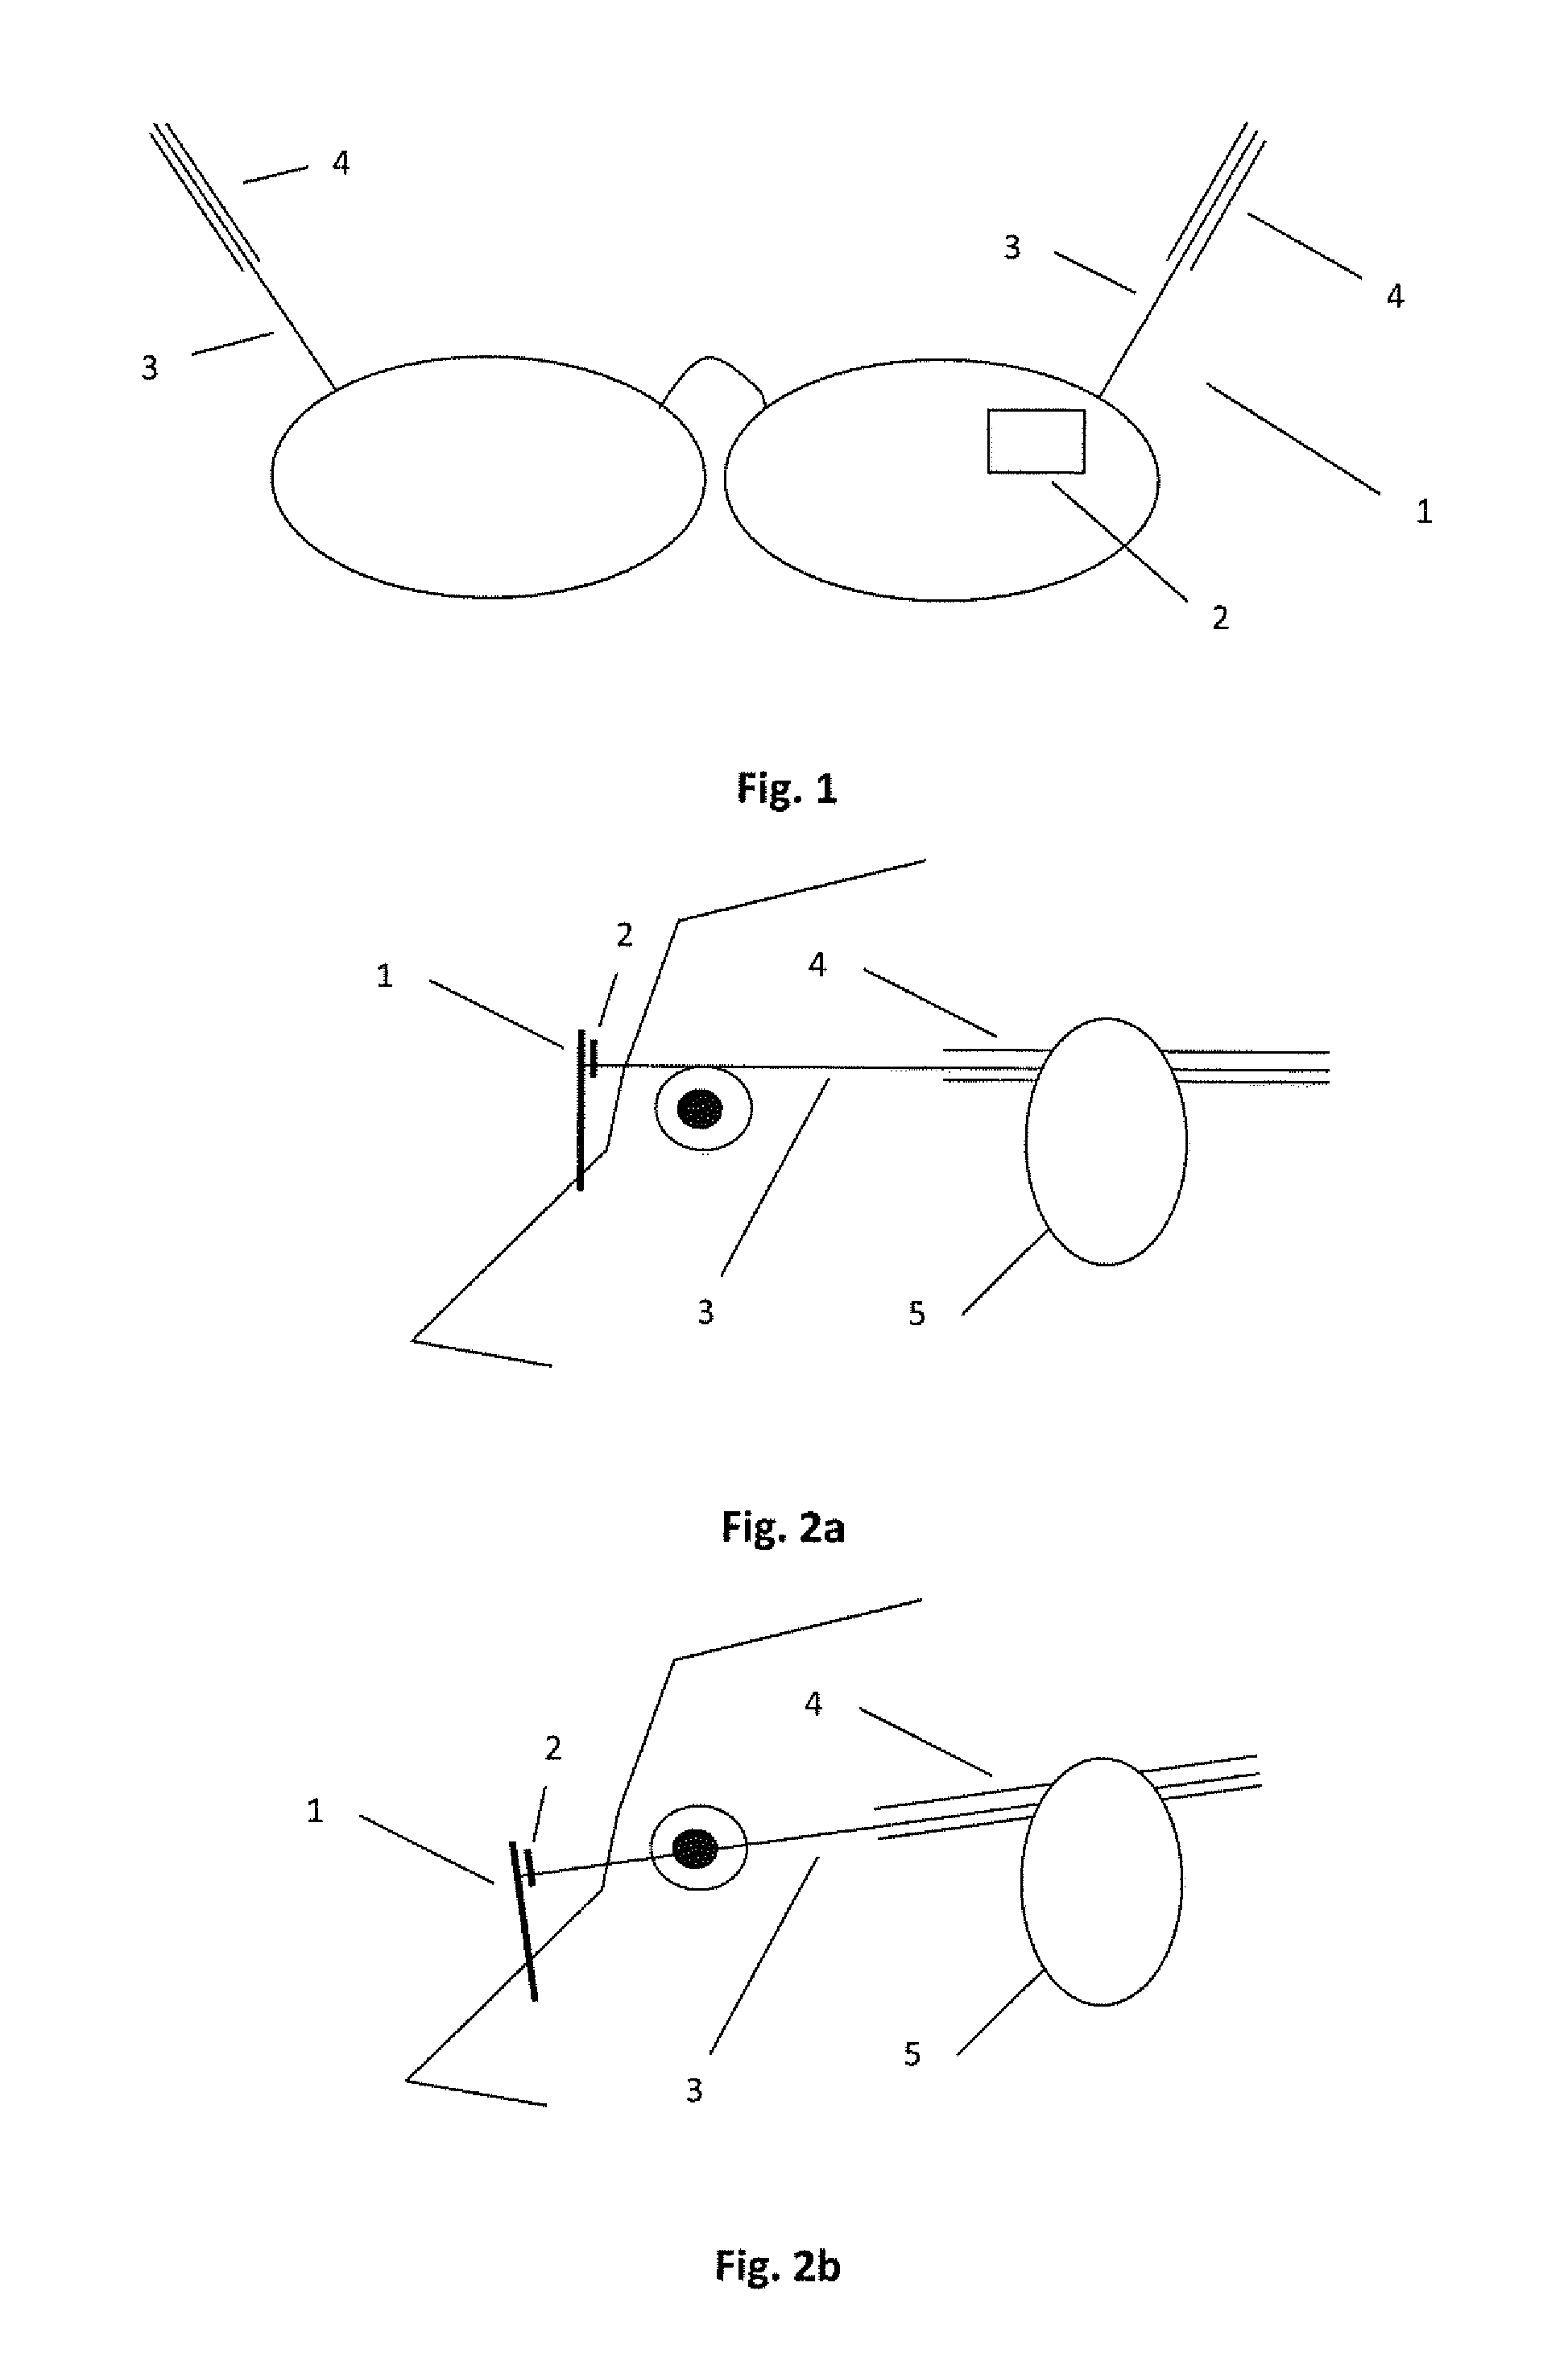 Method for Selecting an Information Source for Display on Smart Glasses